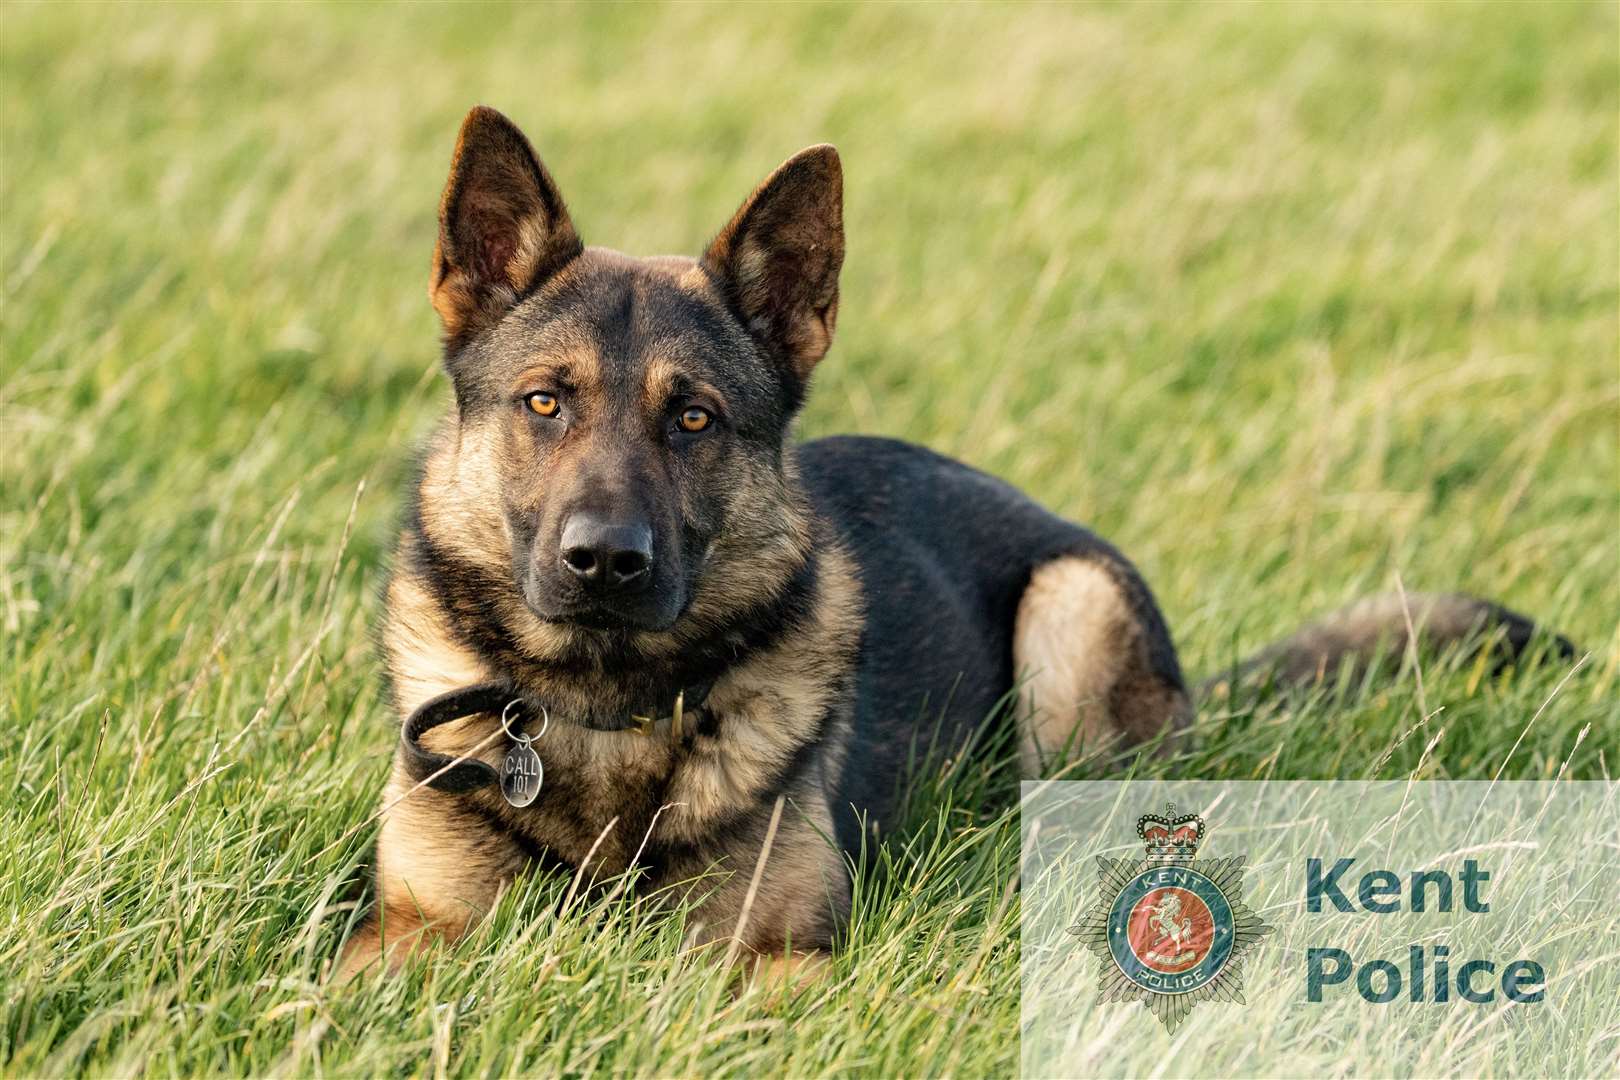 Police dog Bear helped sniff out stolen goods. Photo: Kent Police